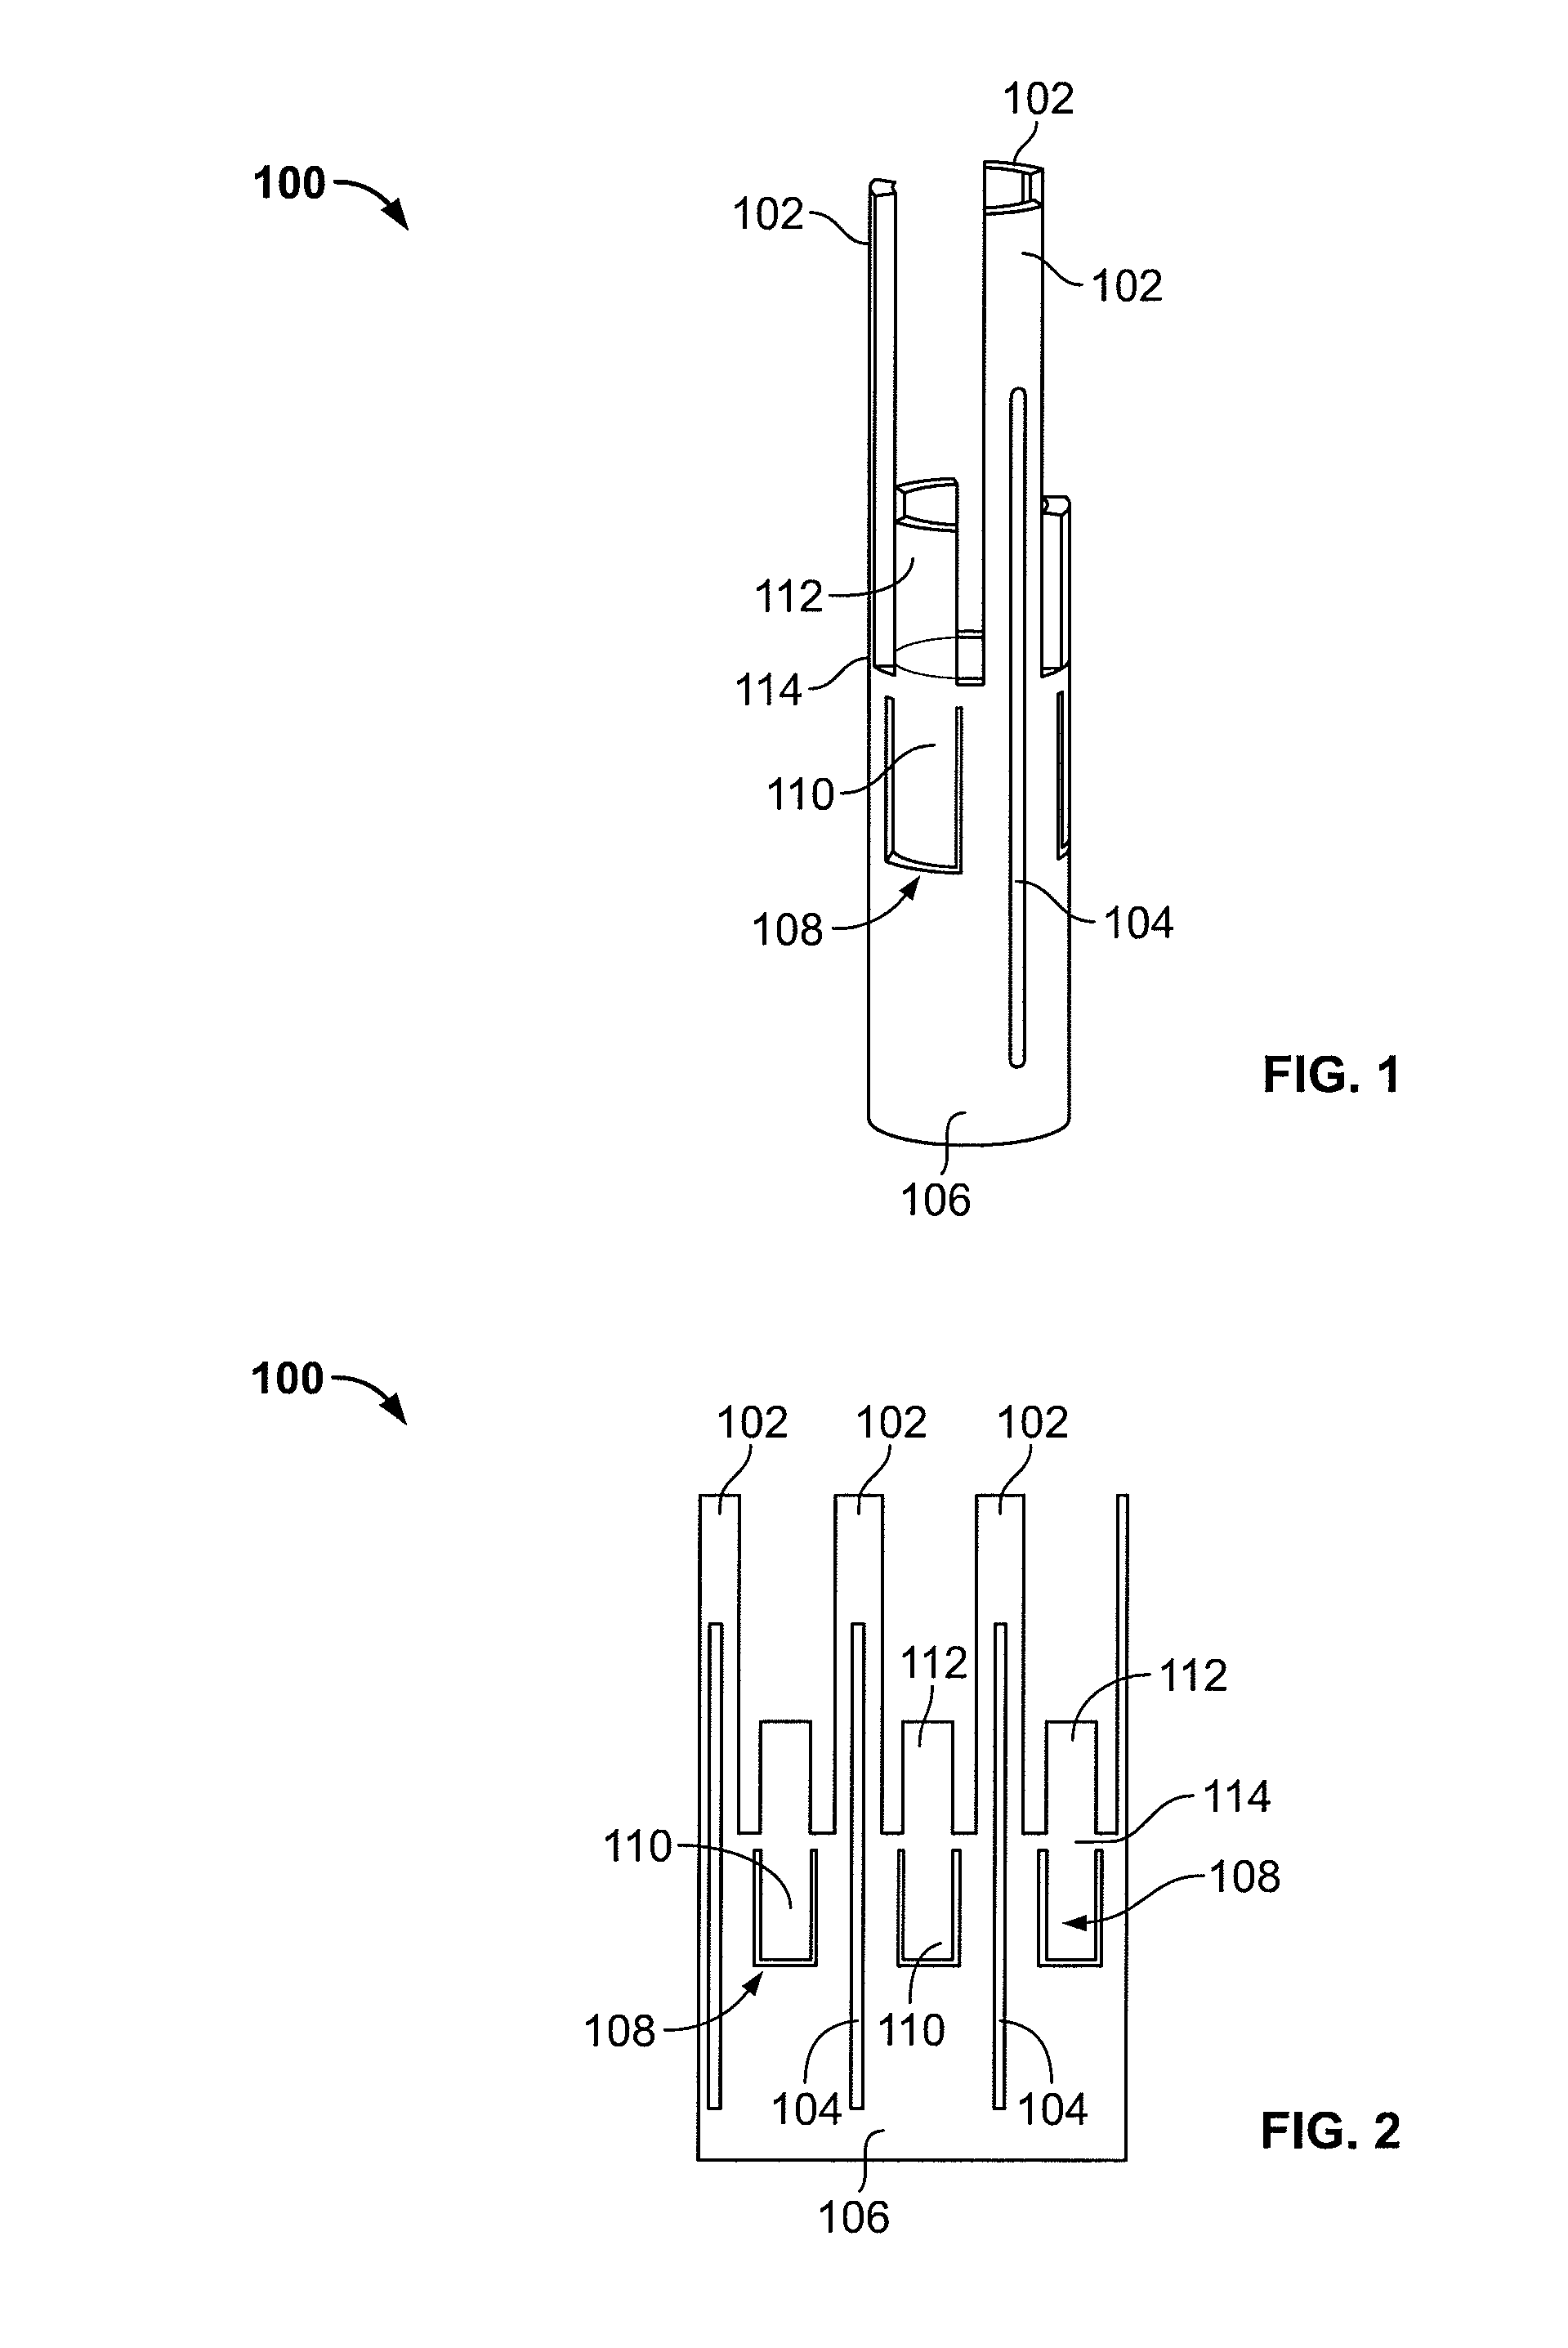 One Piece Prosthetic Valve Support Structure and Related Assemblies